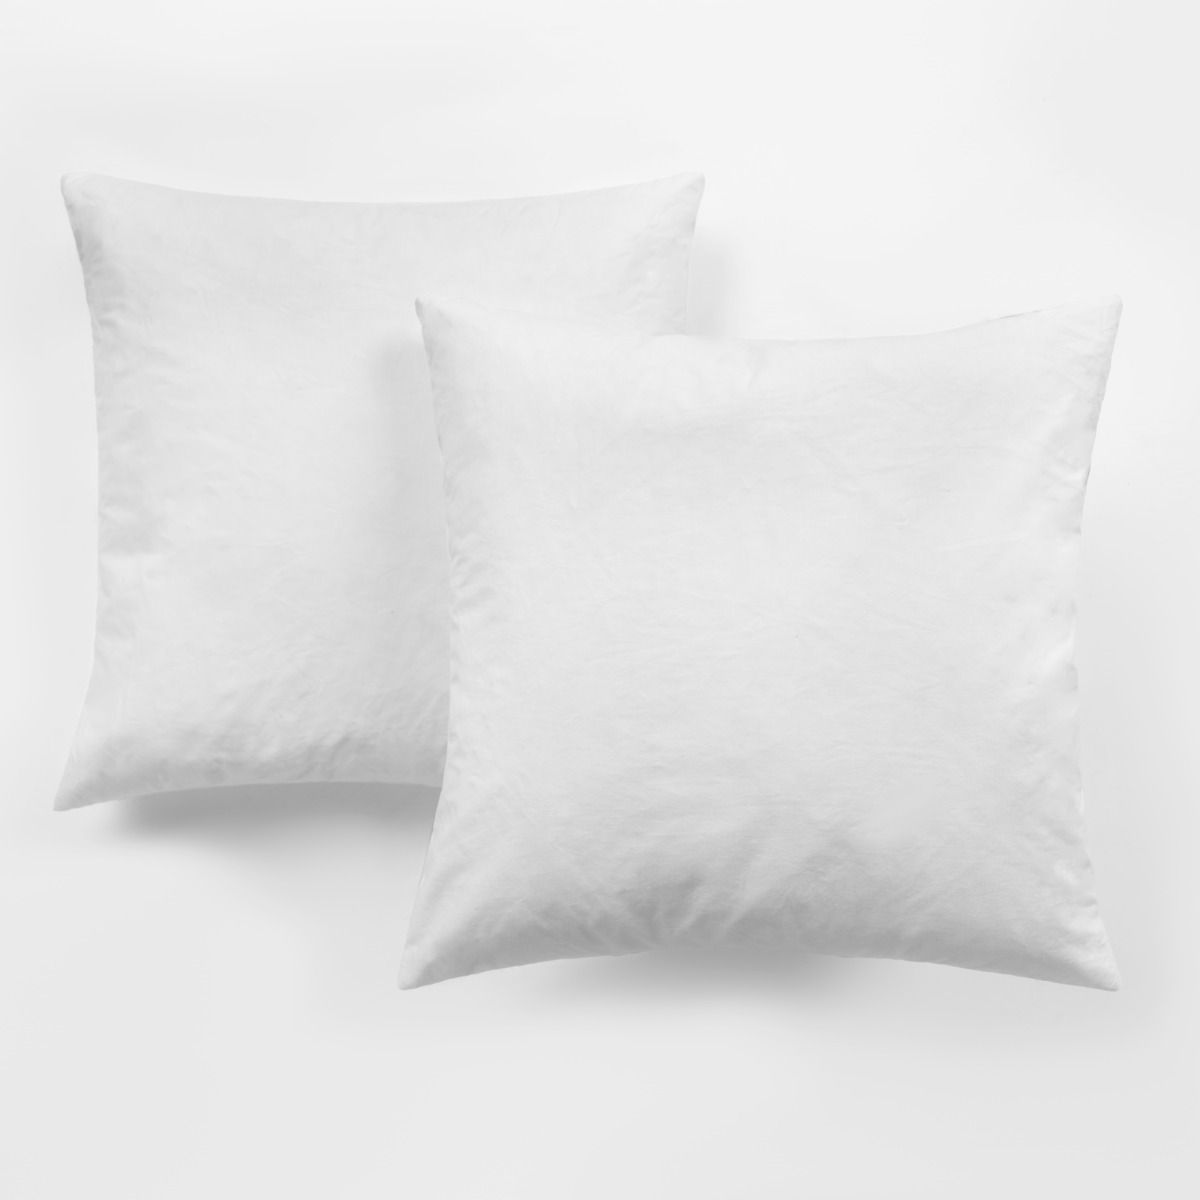 Duck Feather Cushion Pads